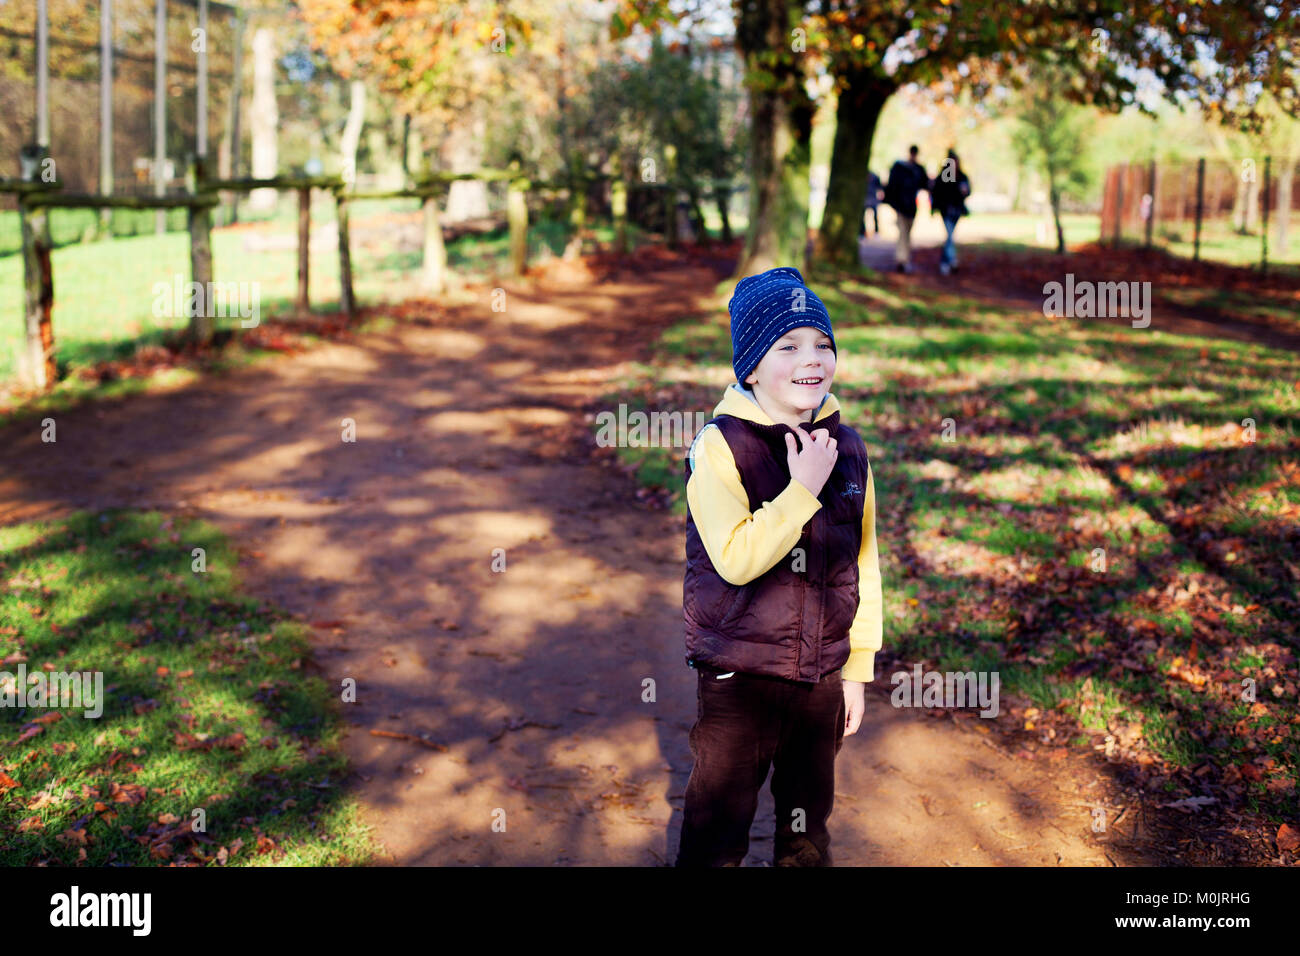 A smiling small boy in warm clothing is ready to have fun in a golden autumn park in United Kingdom. Autumn light, freedom, happiness, childhood. Stock Photo